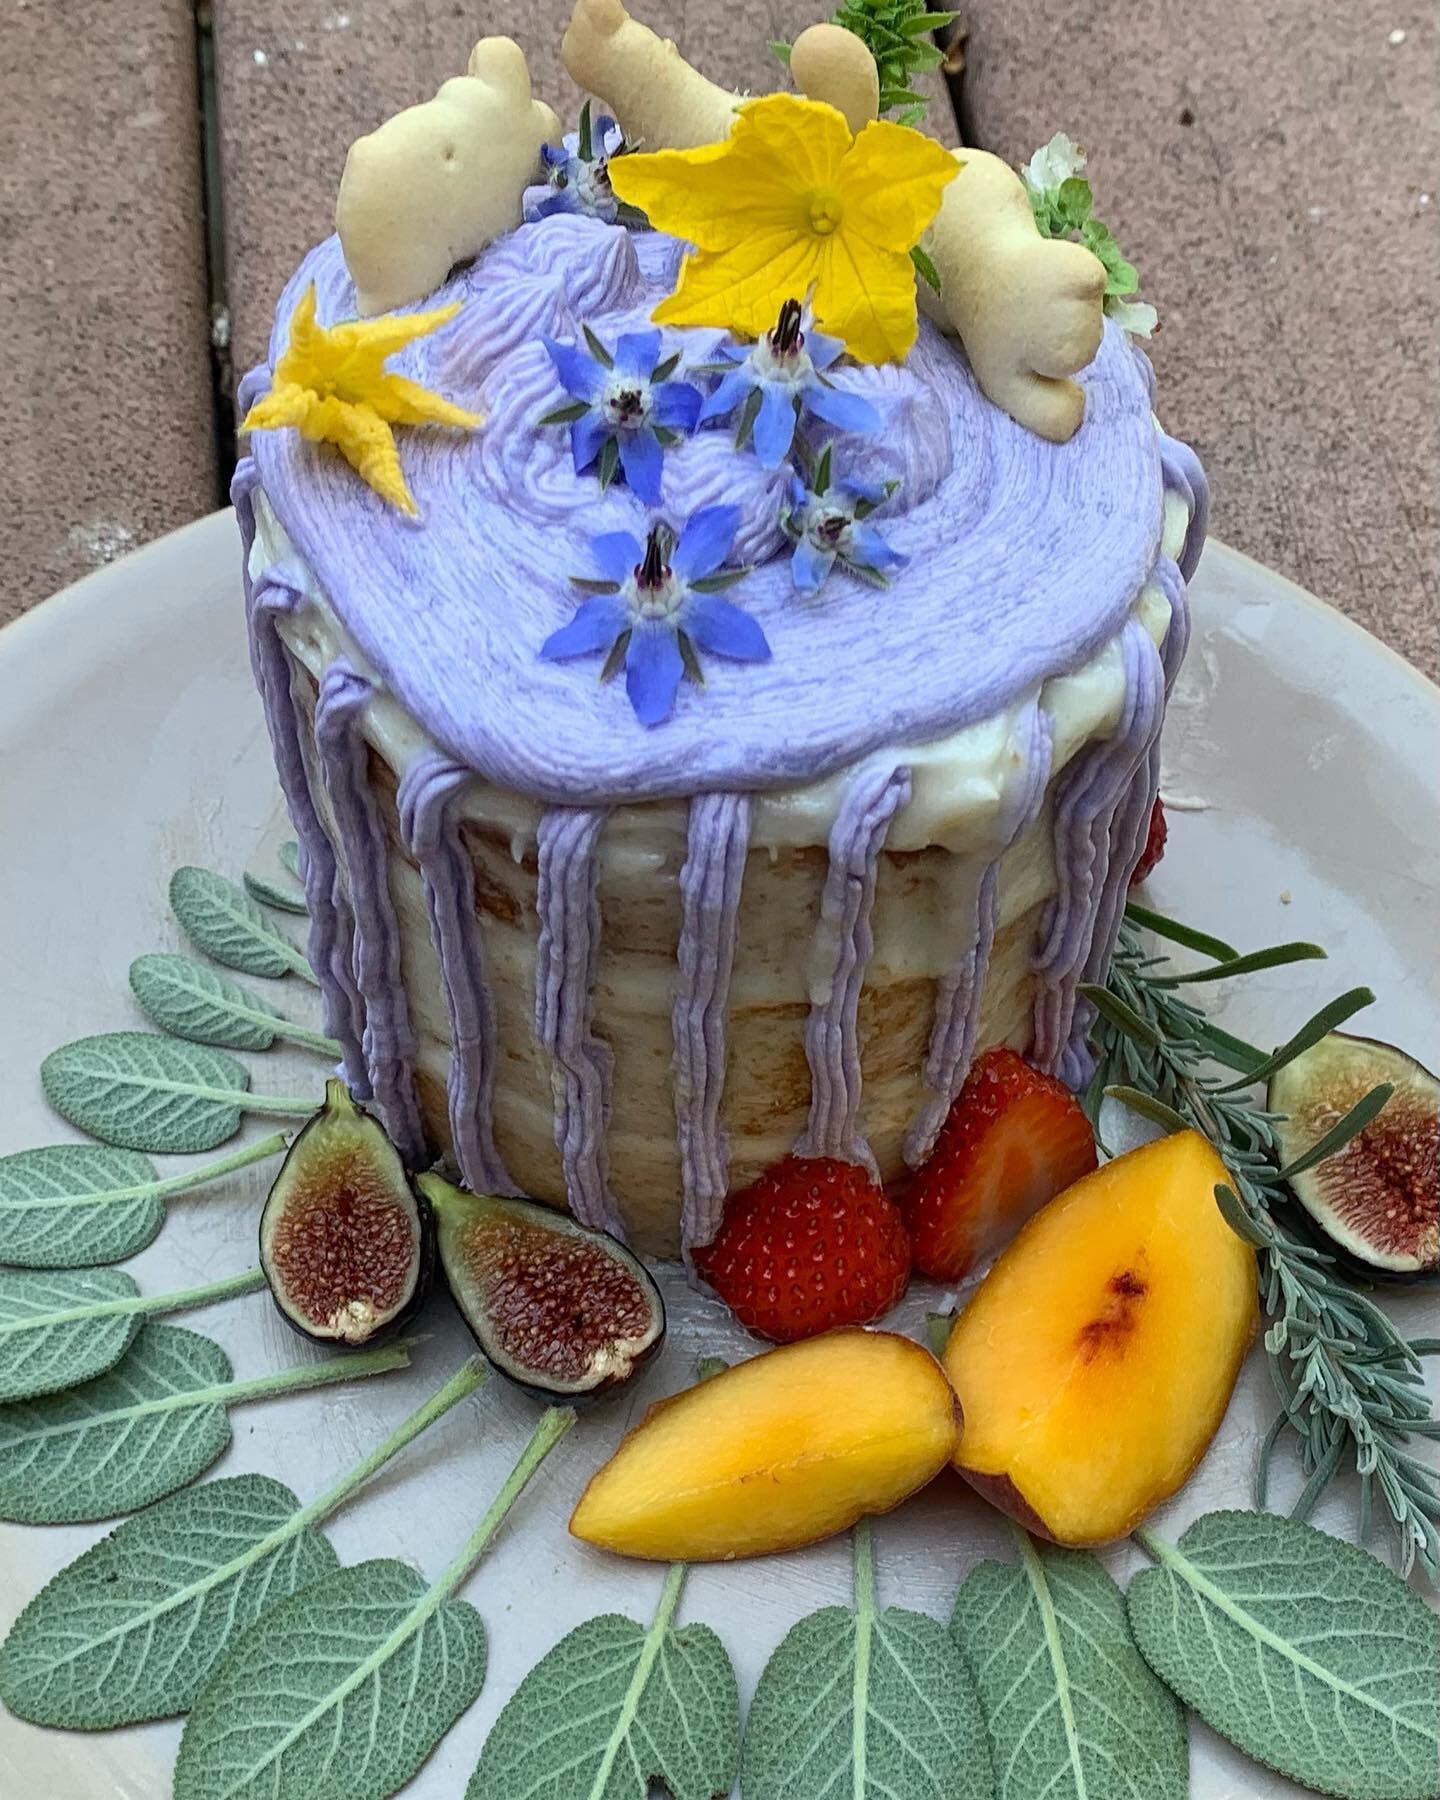 a delicious tiny lavender cake @jasen_liu made and let me decorate 🍓🍑🪷🍋🥝🌸🥭